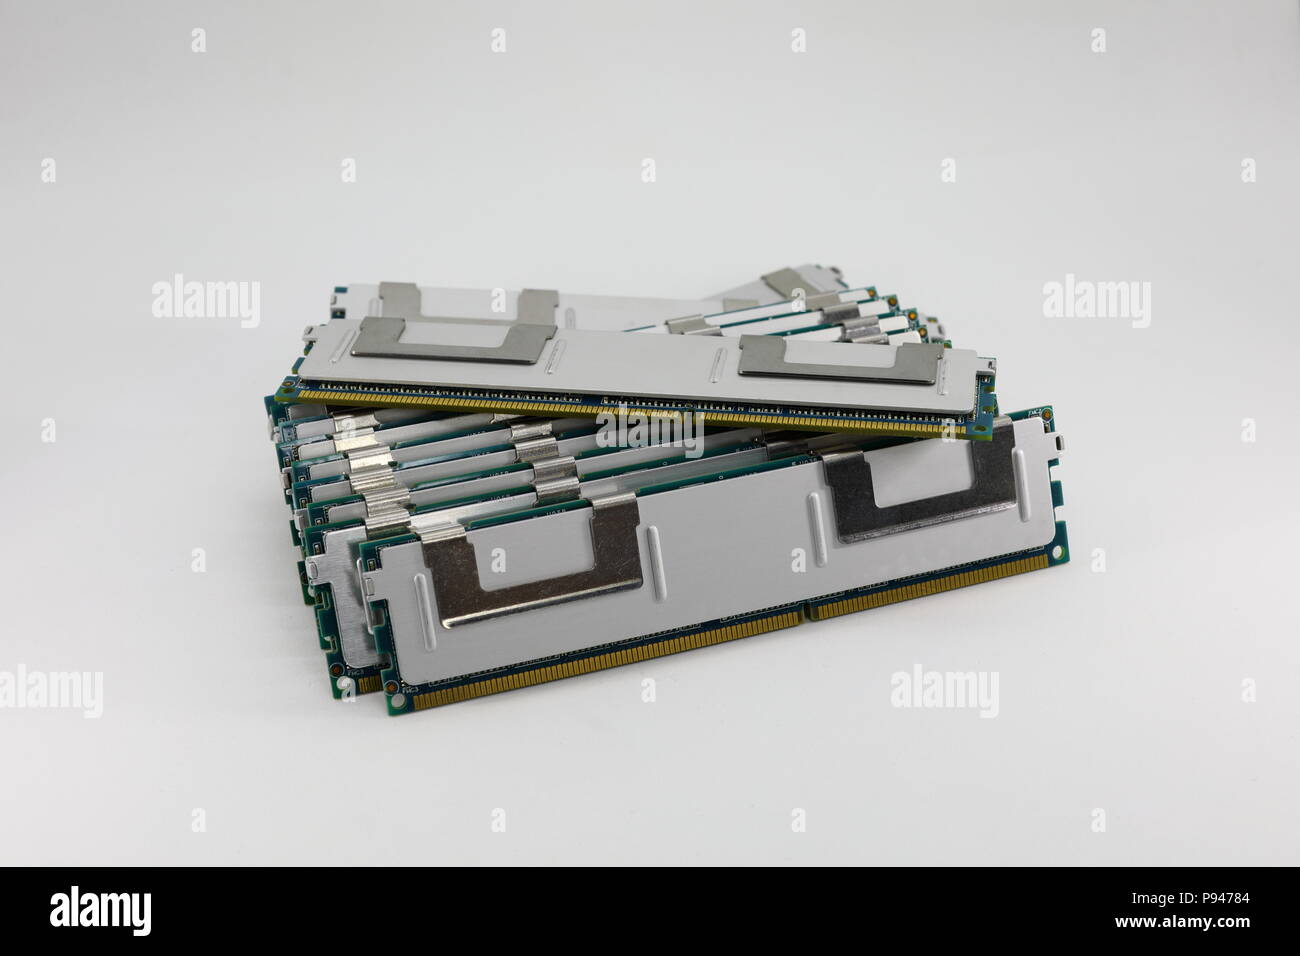 row of High performance DDR3 RAM memory module isolated on white background Stock Photo